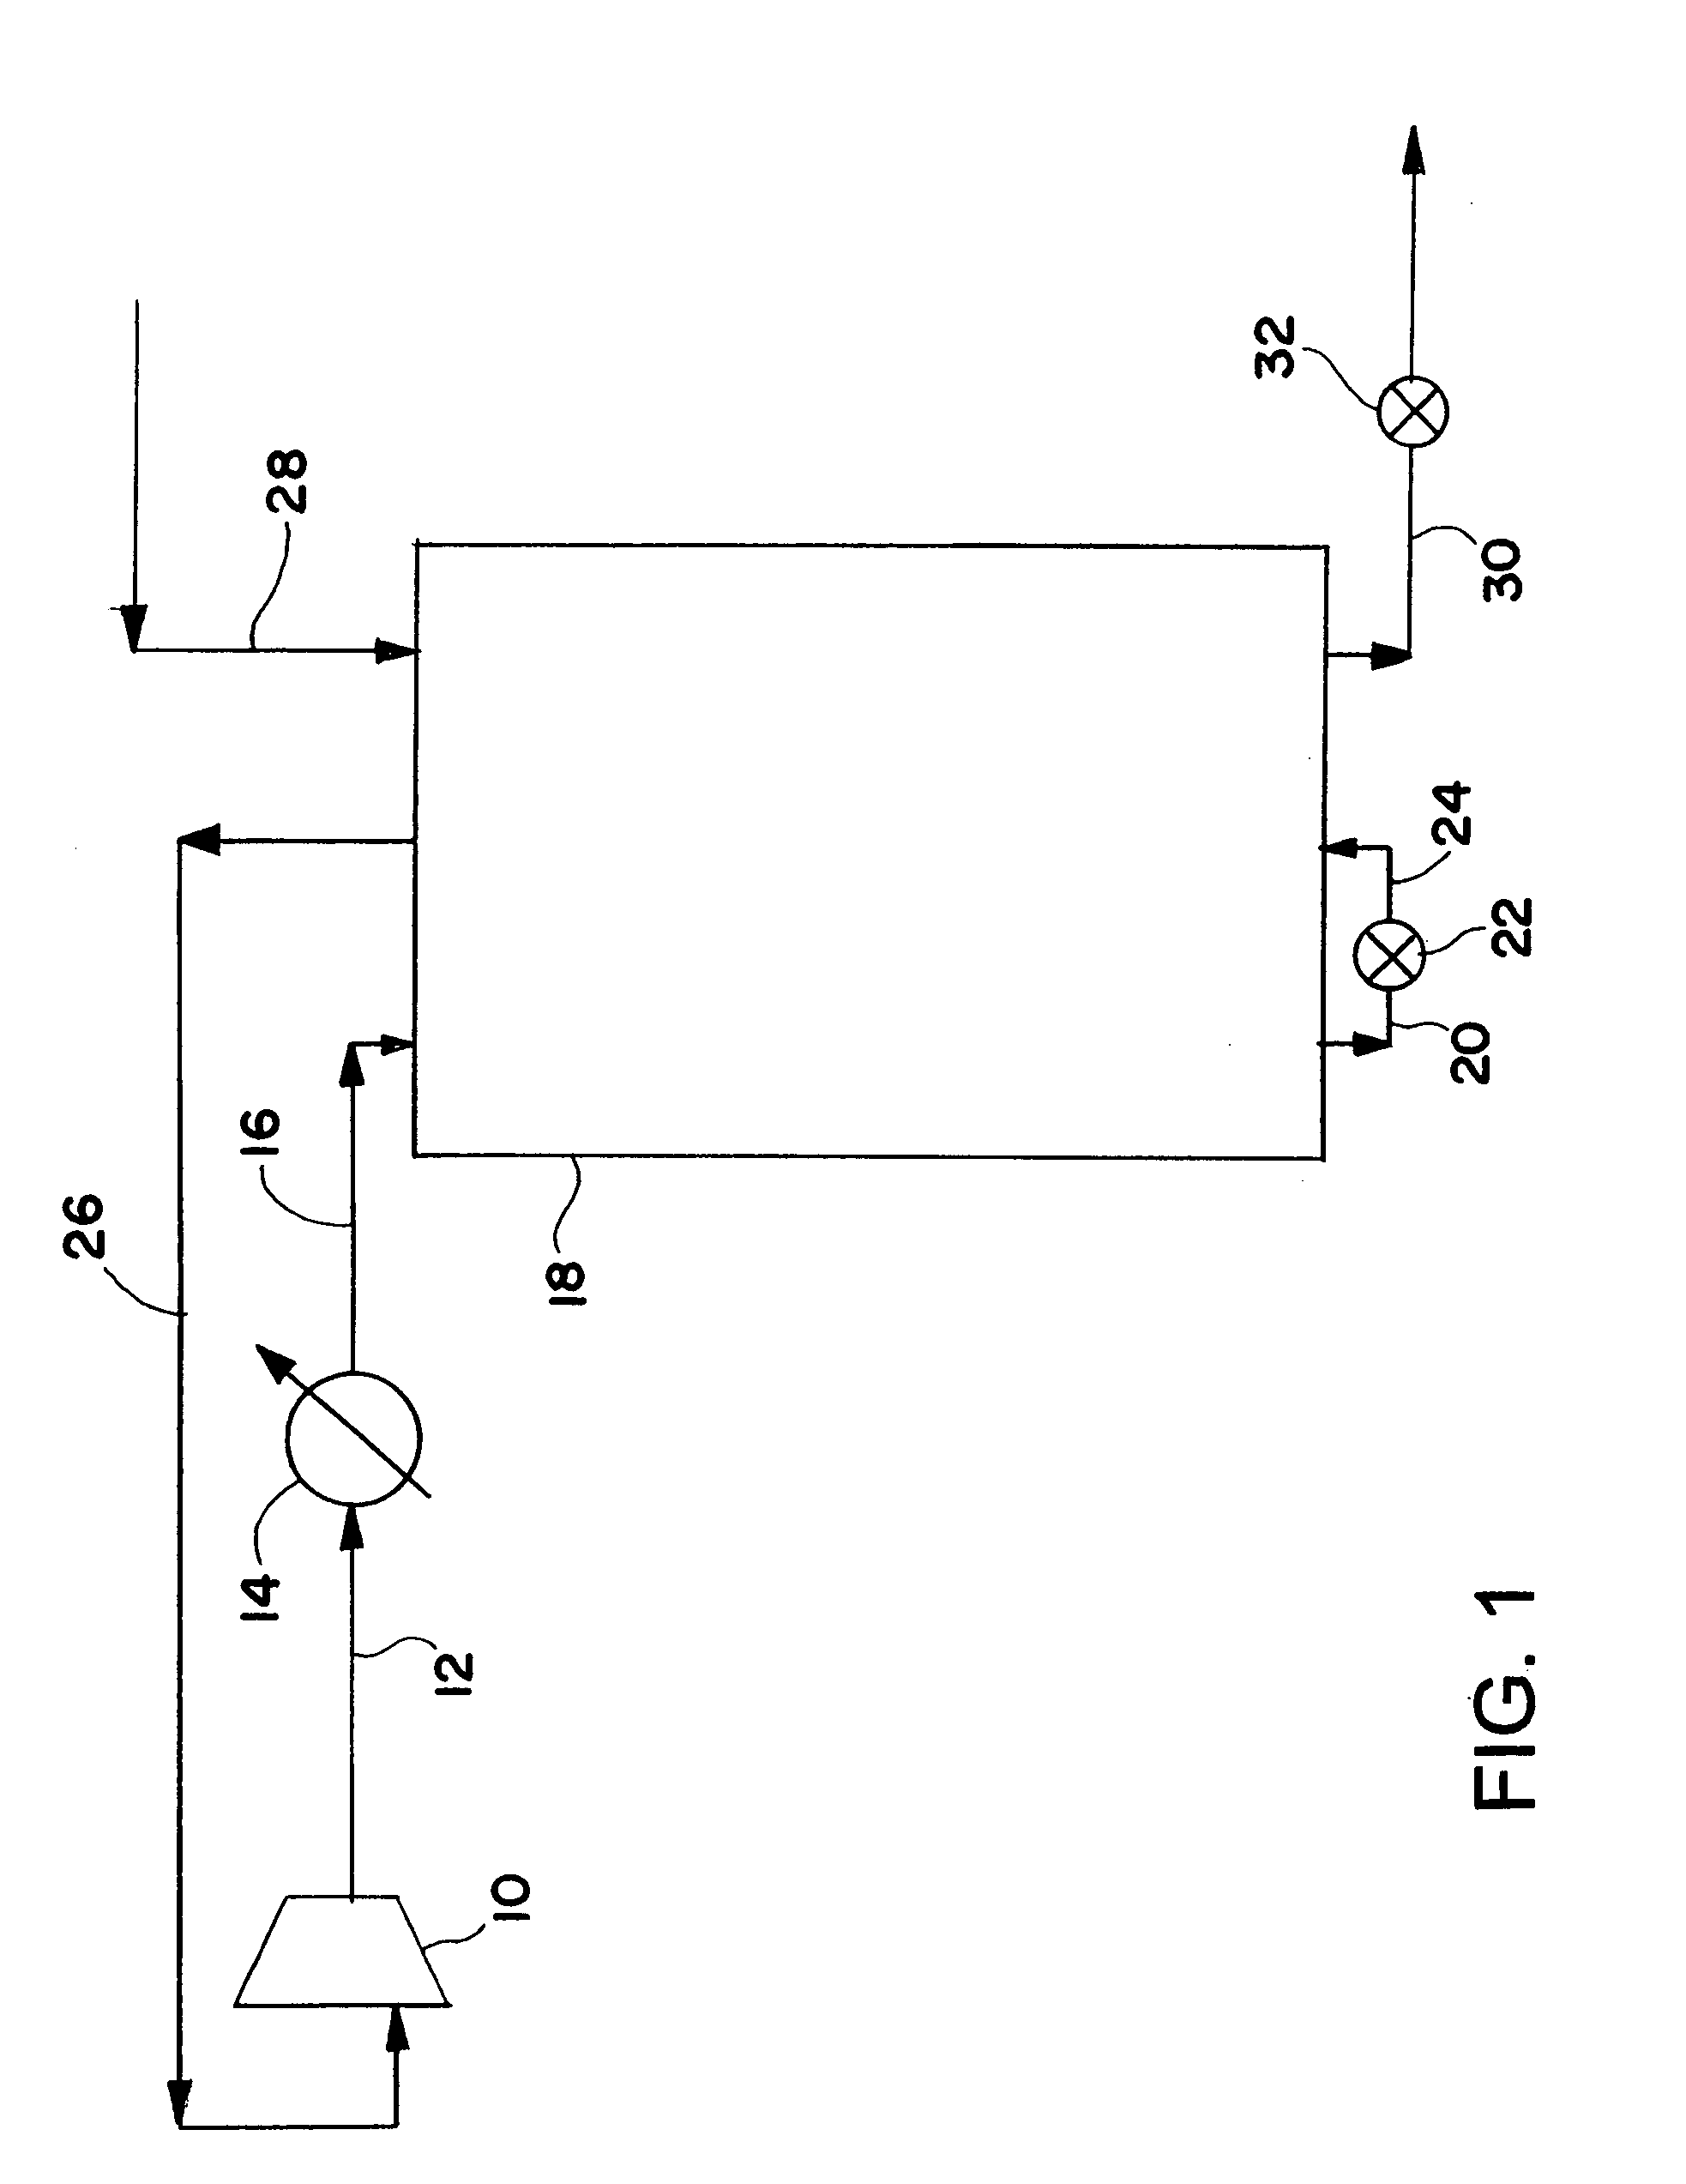 Process for cooling a product in a heat exchanger employing microchannels